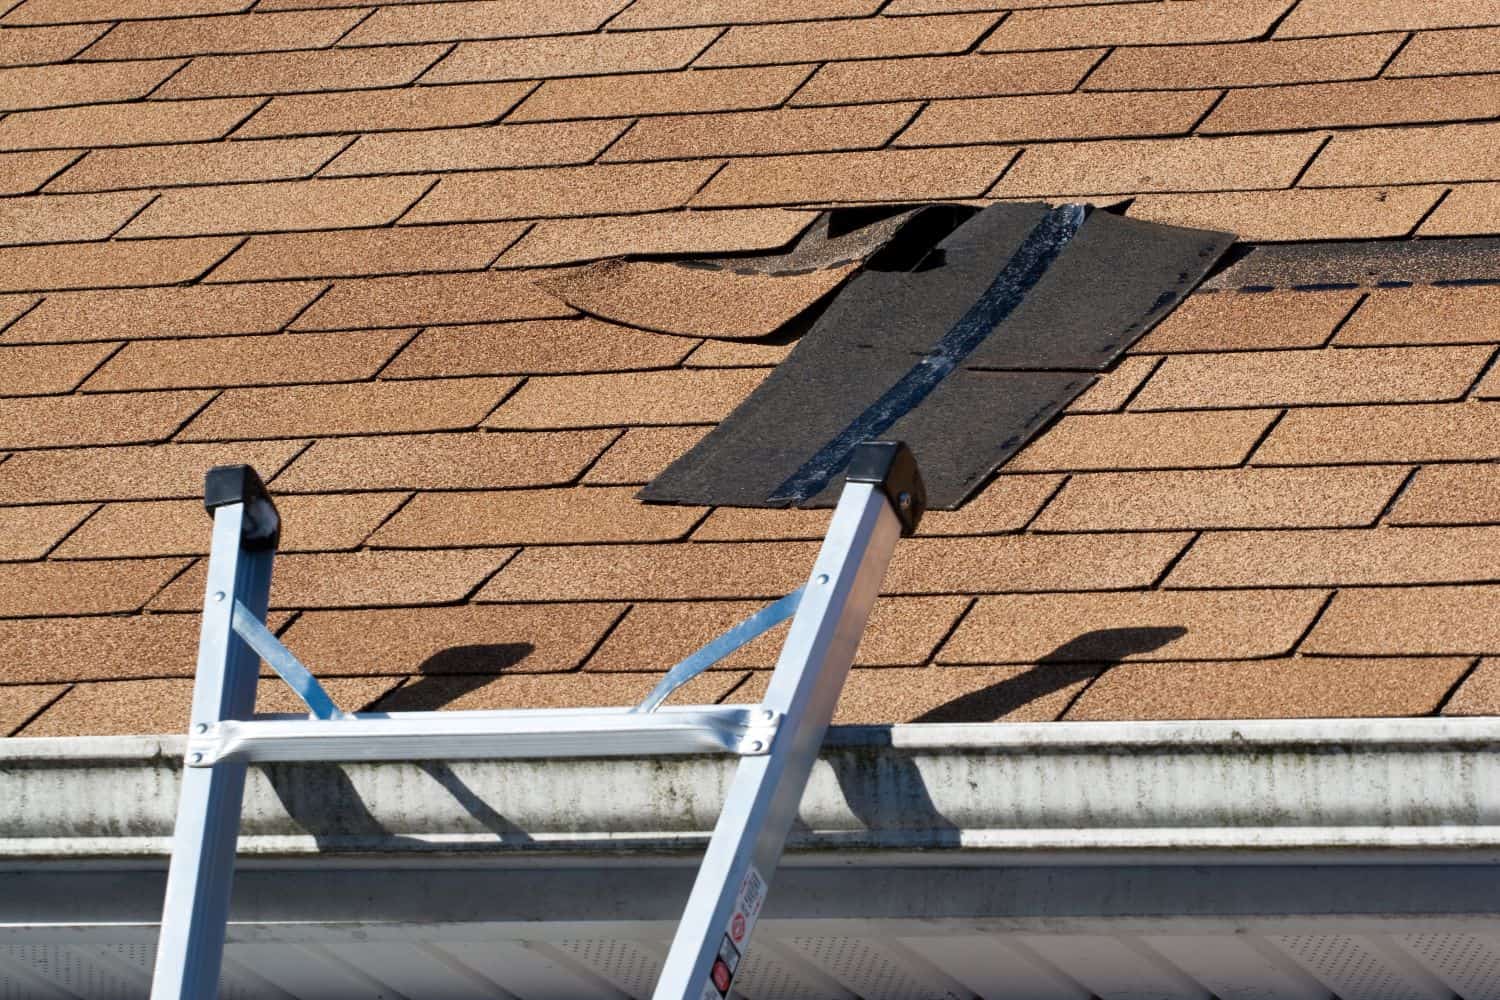 common roof problems include repairing the shingles